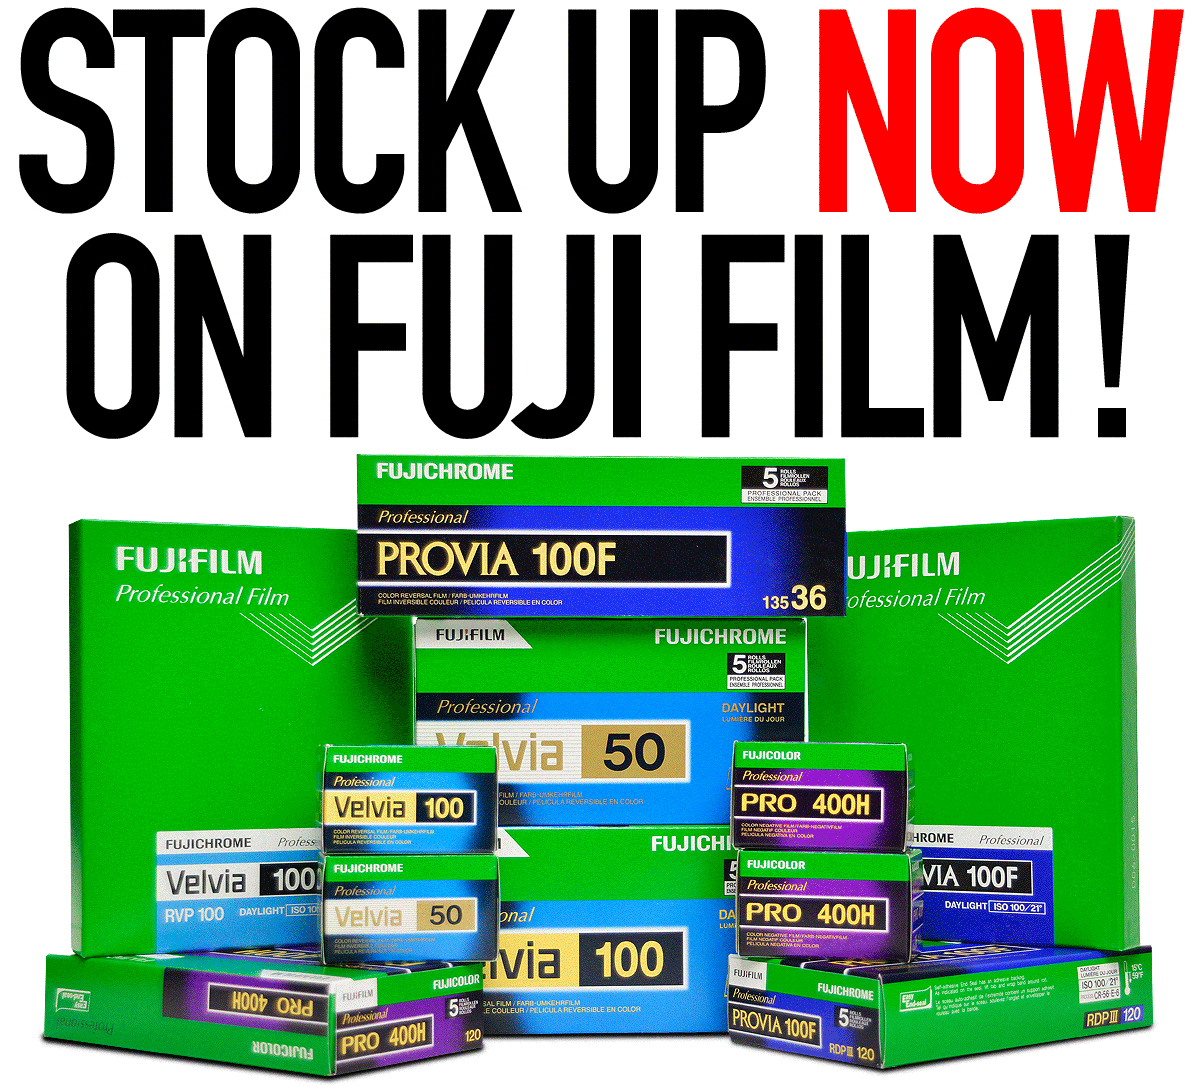 Now Is the Best Time to Stock Up on Your Favorite Fujifilm Emulsions